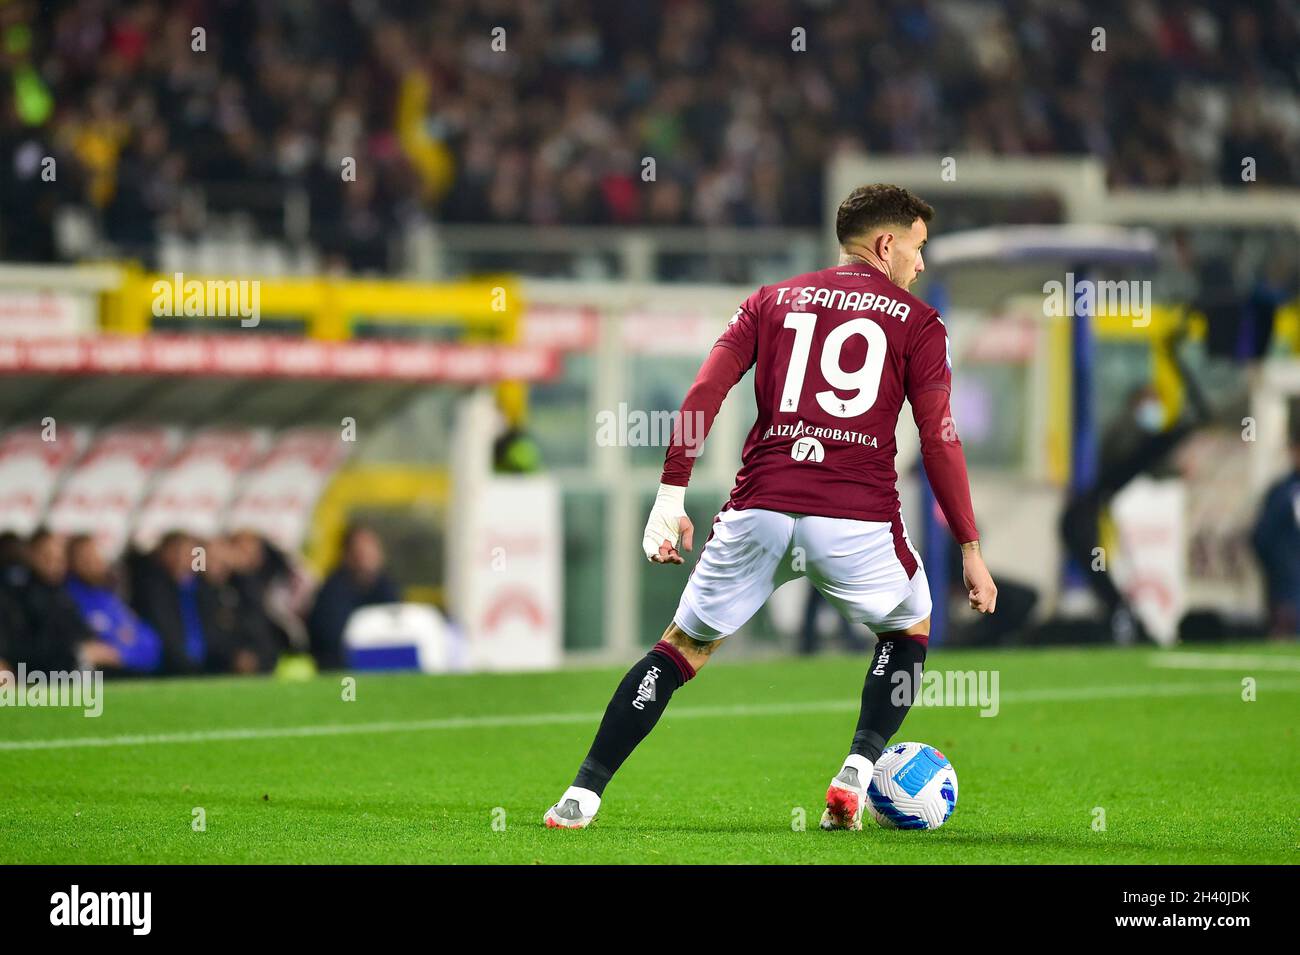 Torino, Italy. 30th Oct, 2021. Antonio Sanabria of Torino FC, during the Serie A match between Torino FC and UC Sampdoria on October, 30th, 2021 at Stadio Grande Torino in Torino, Italy. Picture by Credit: Antonio Polia/Alamy Live News Stock Photo